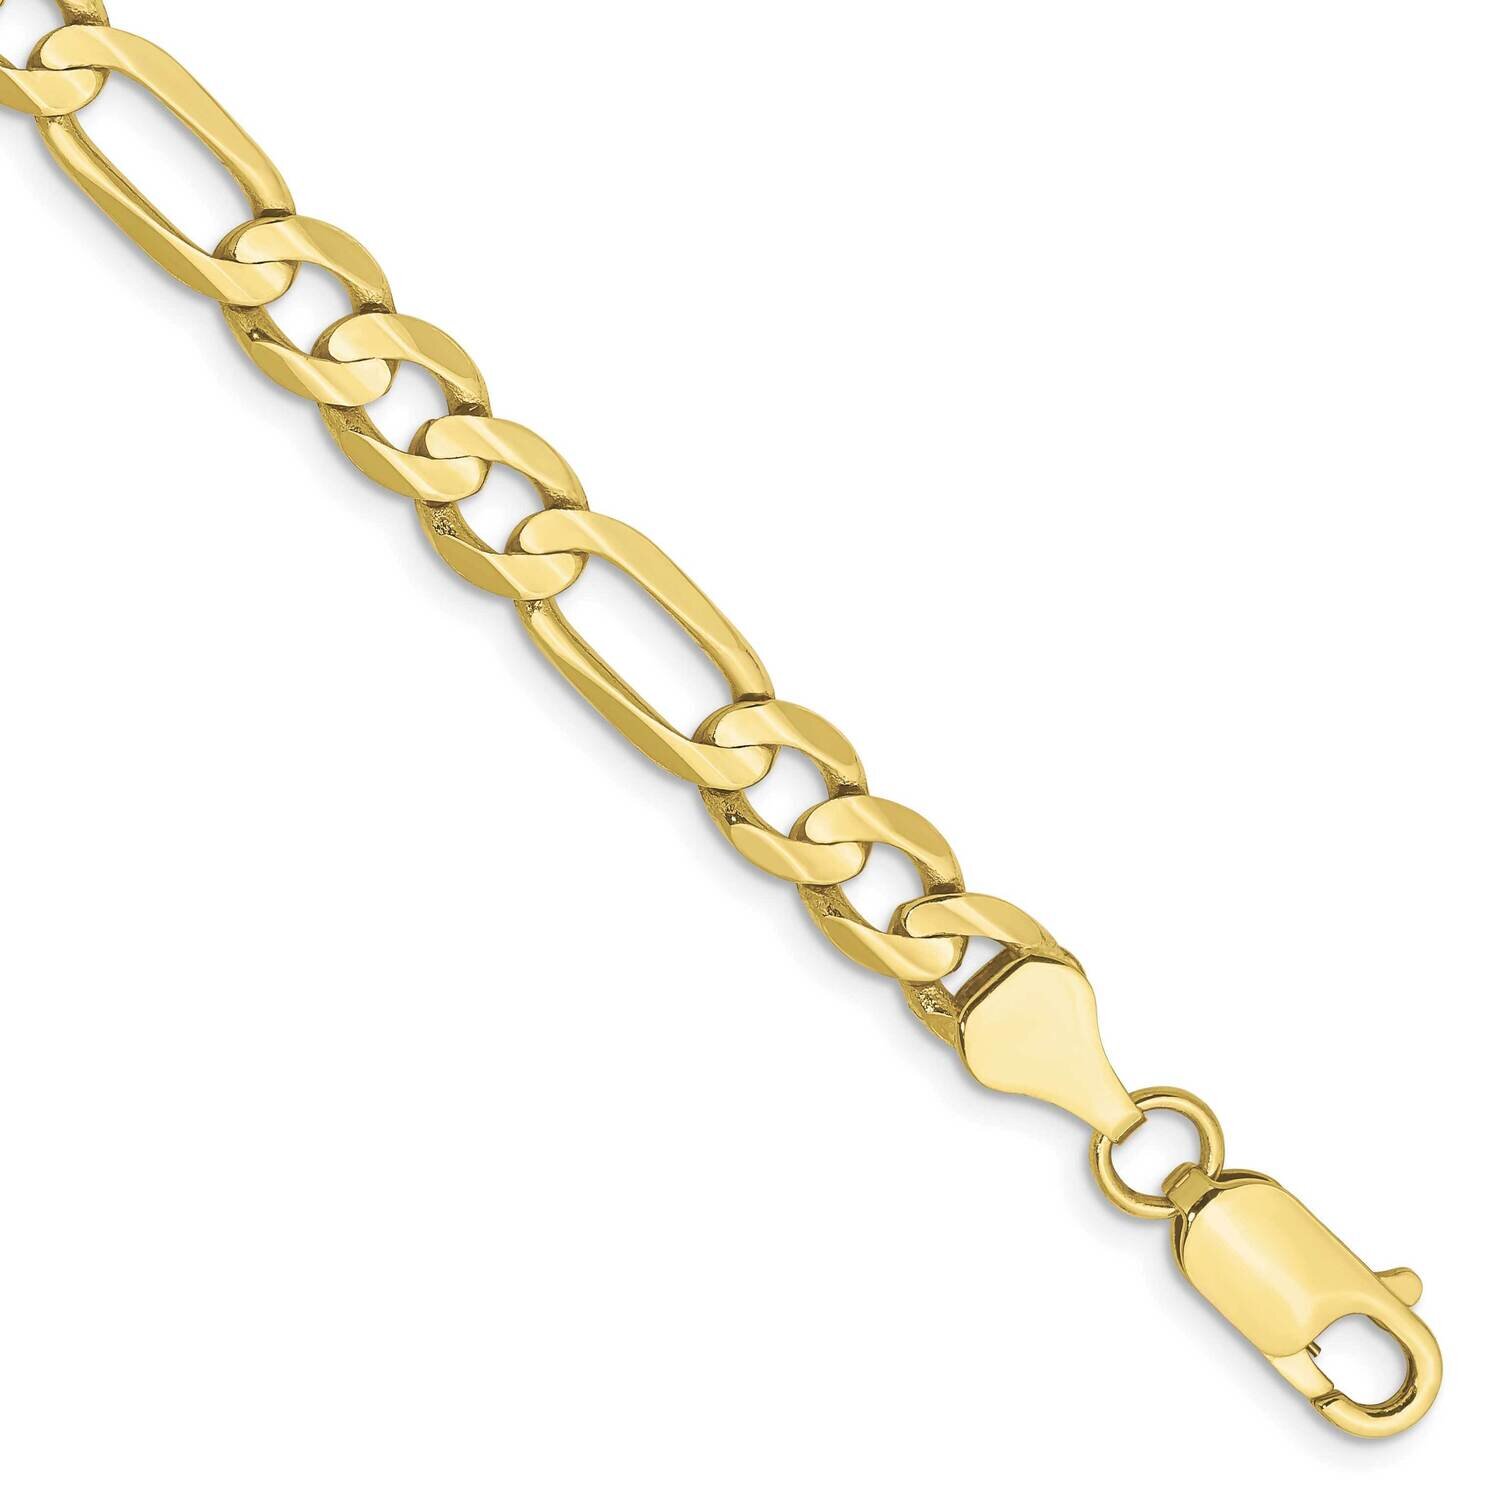 6mm Concave Open Figaro Chain 9 Inch 10k Gold 10LF160-9